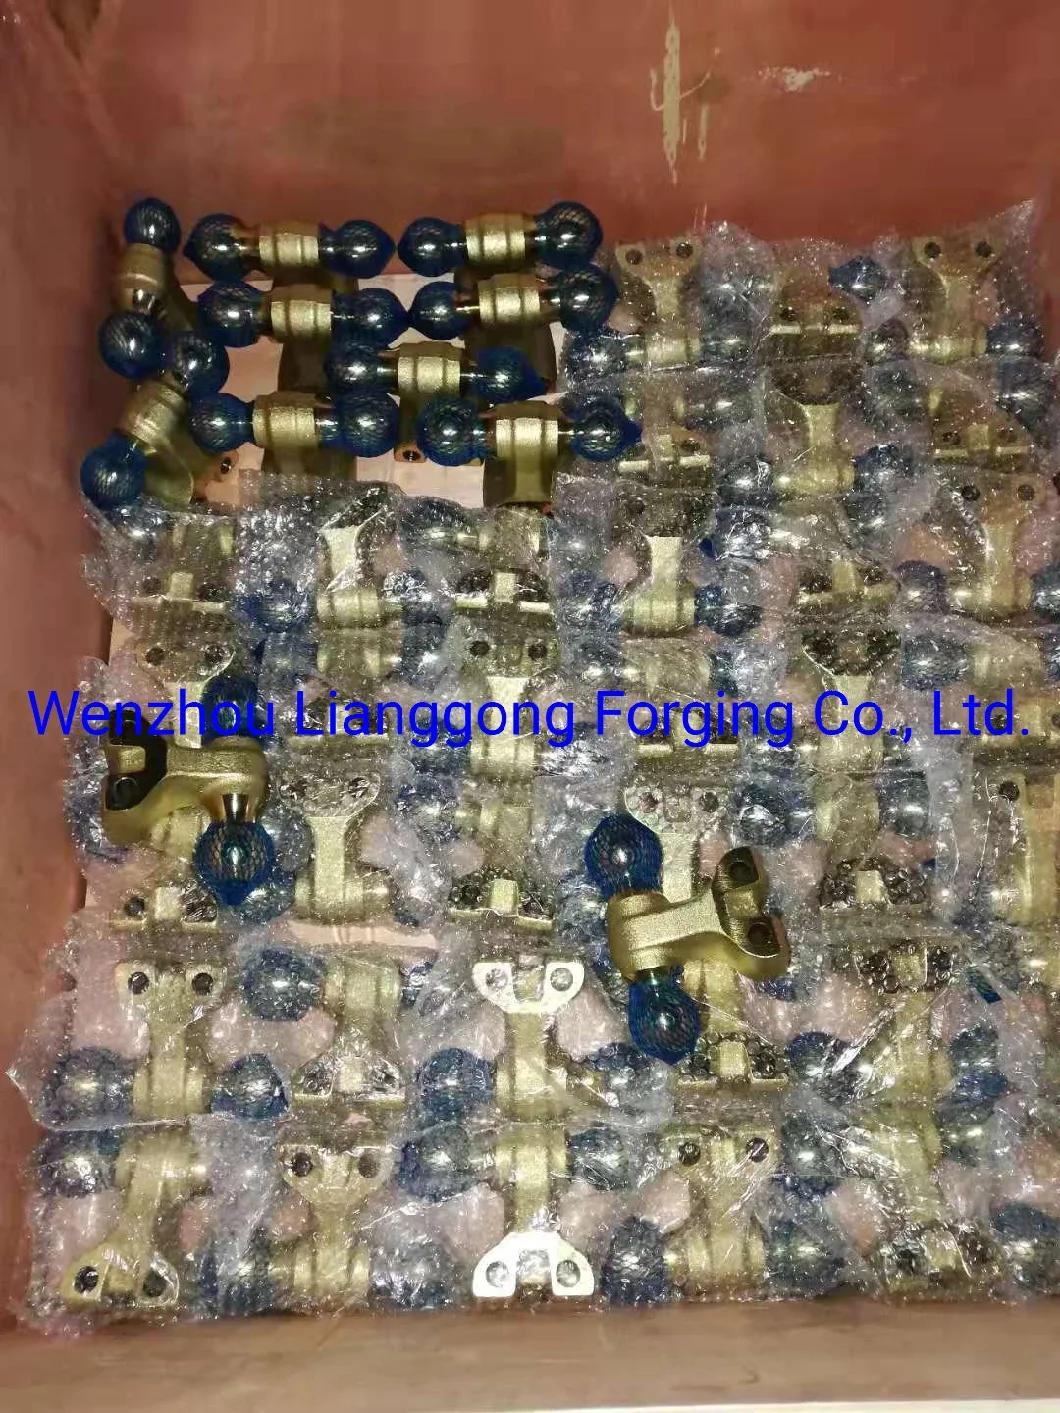 Customized Hot Closed Die Forging Steel Part in Construction Machinery/Agricultural Machinery